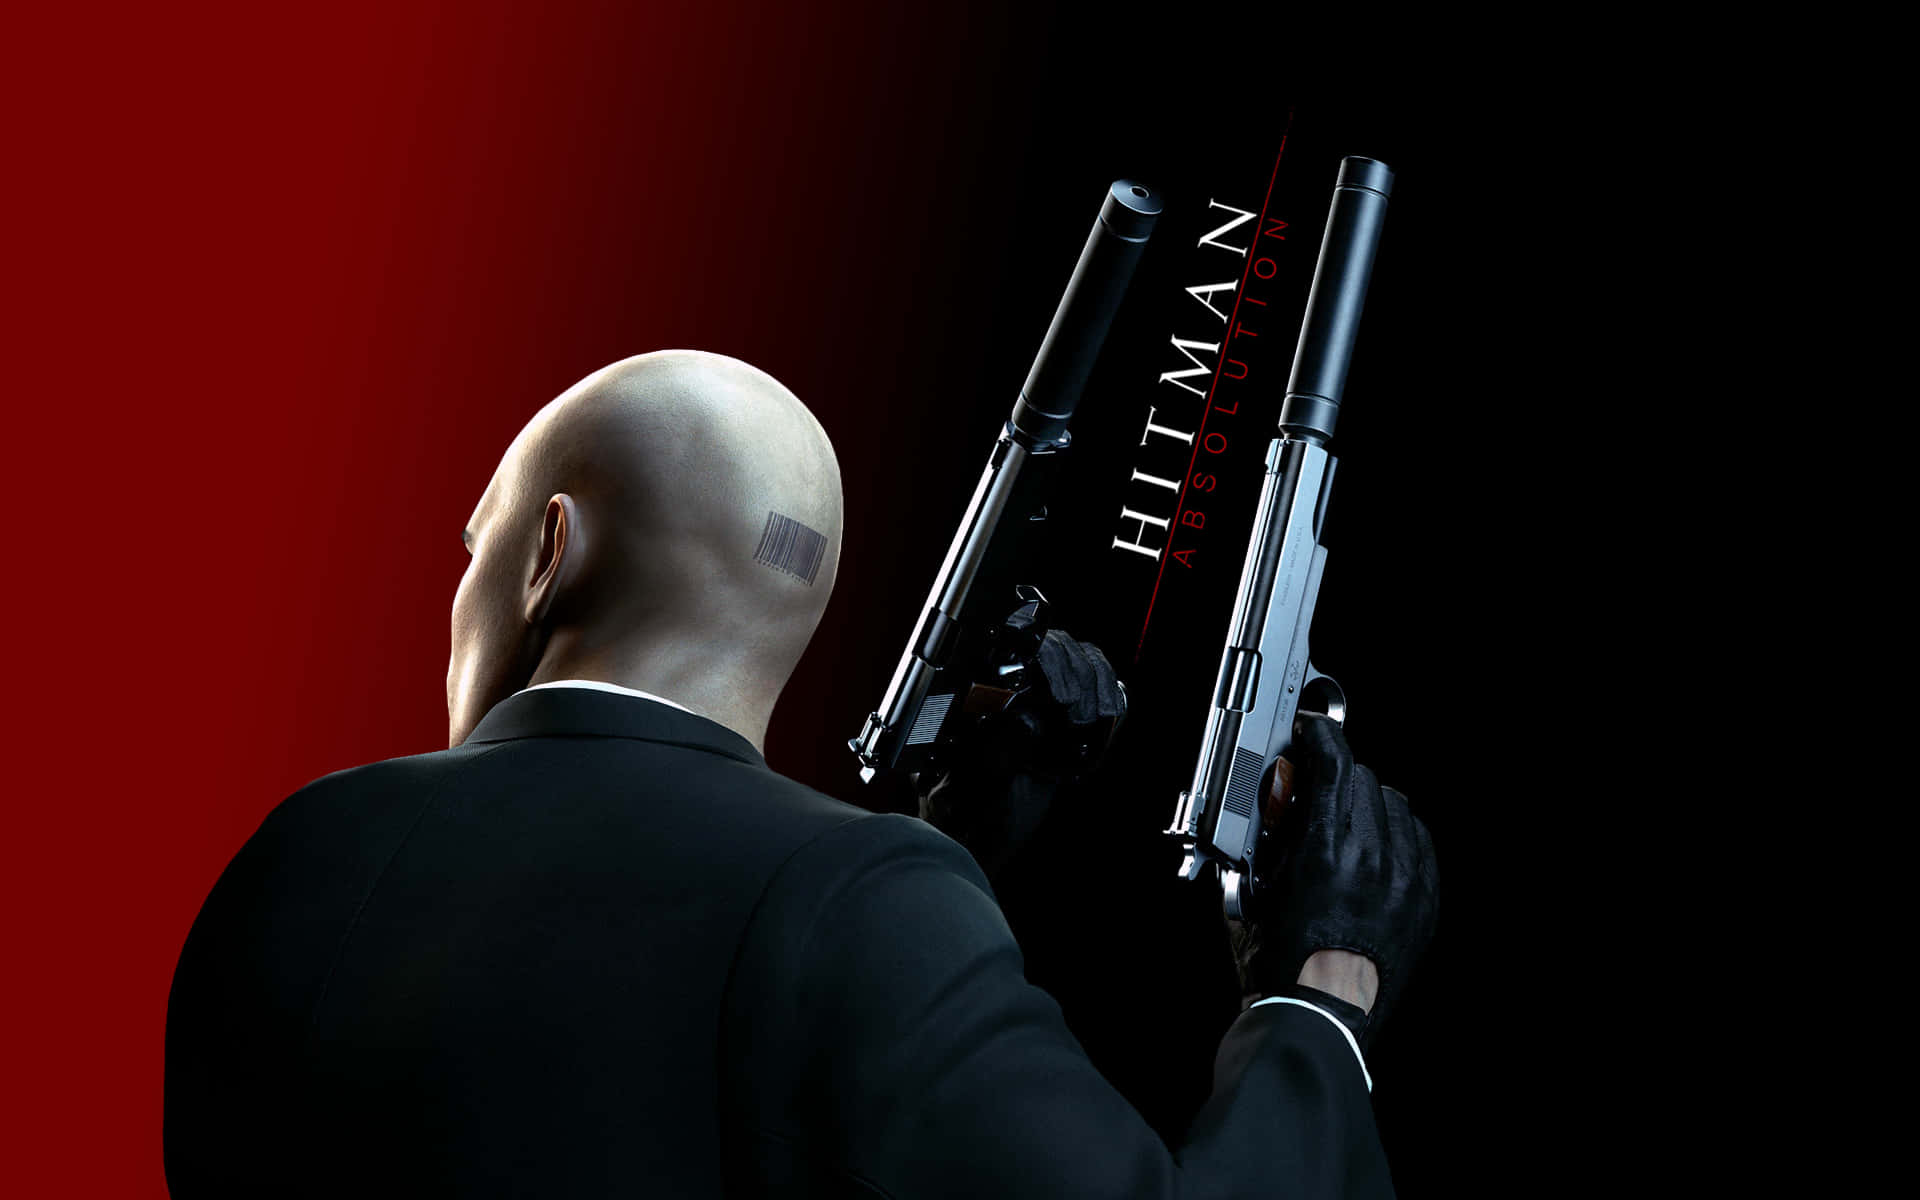 "The stealthy assassin is an expert on Hitman Absolution."